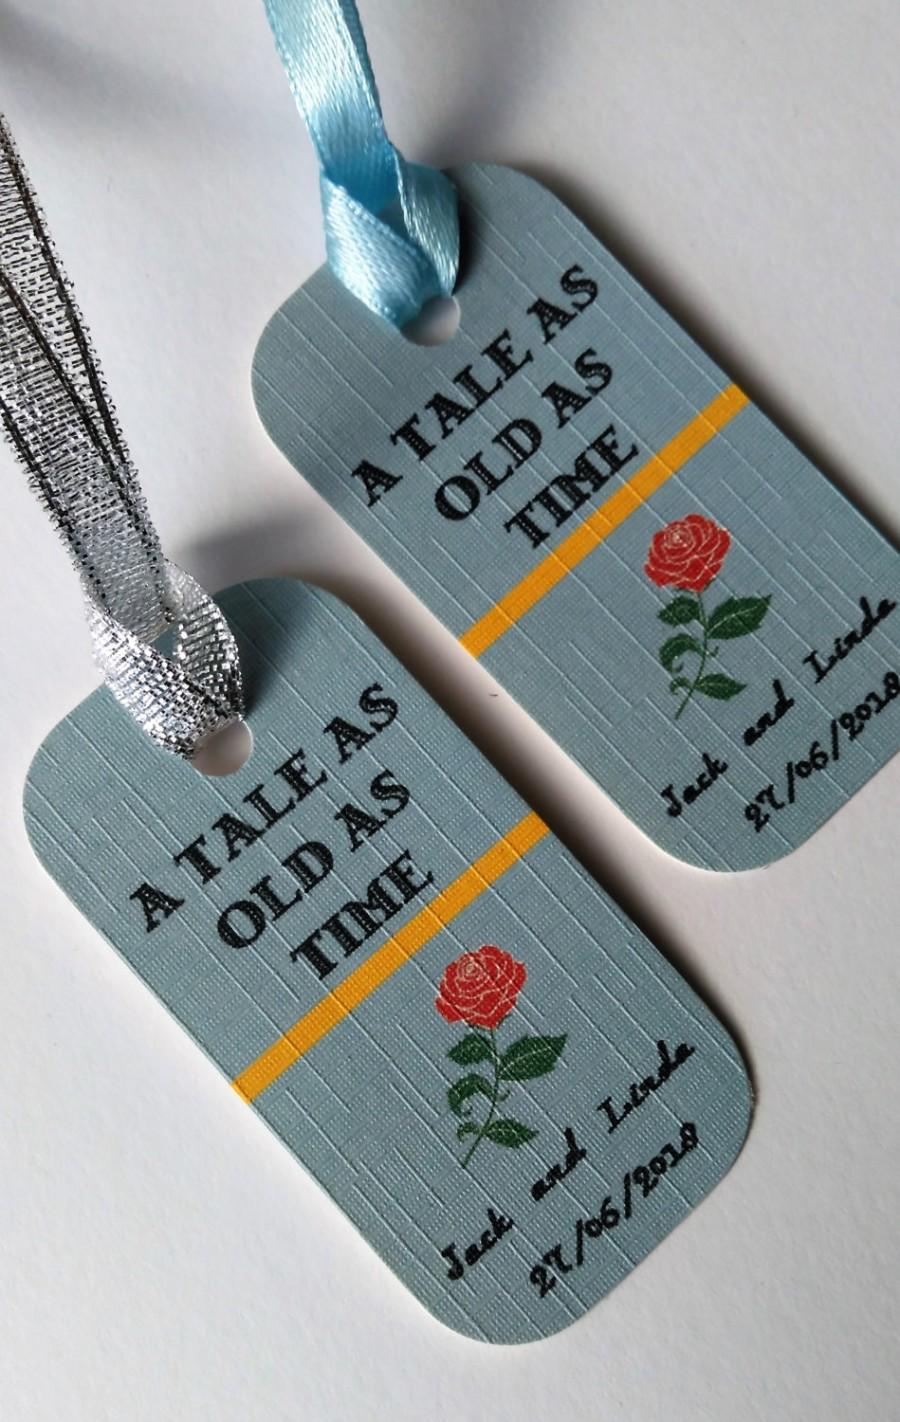 Wedding - A tale as old as time, Beauty and The Beast Wedding, fairytale wedding favour tags, wedding favor tags.